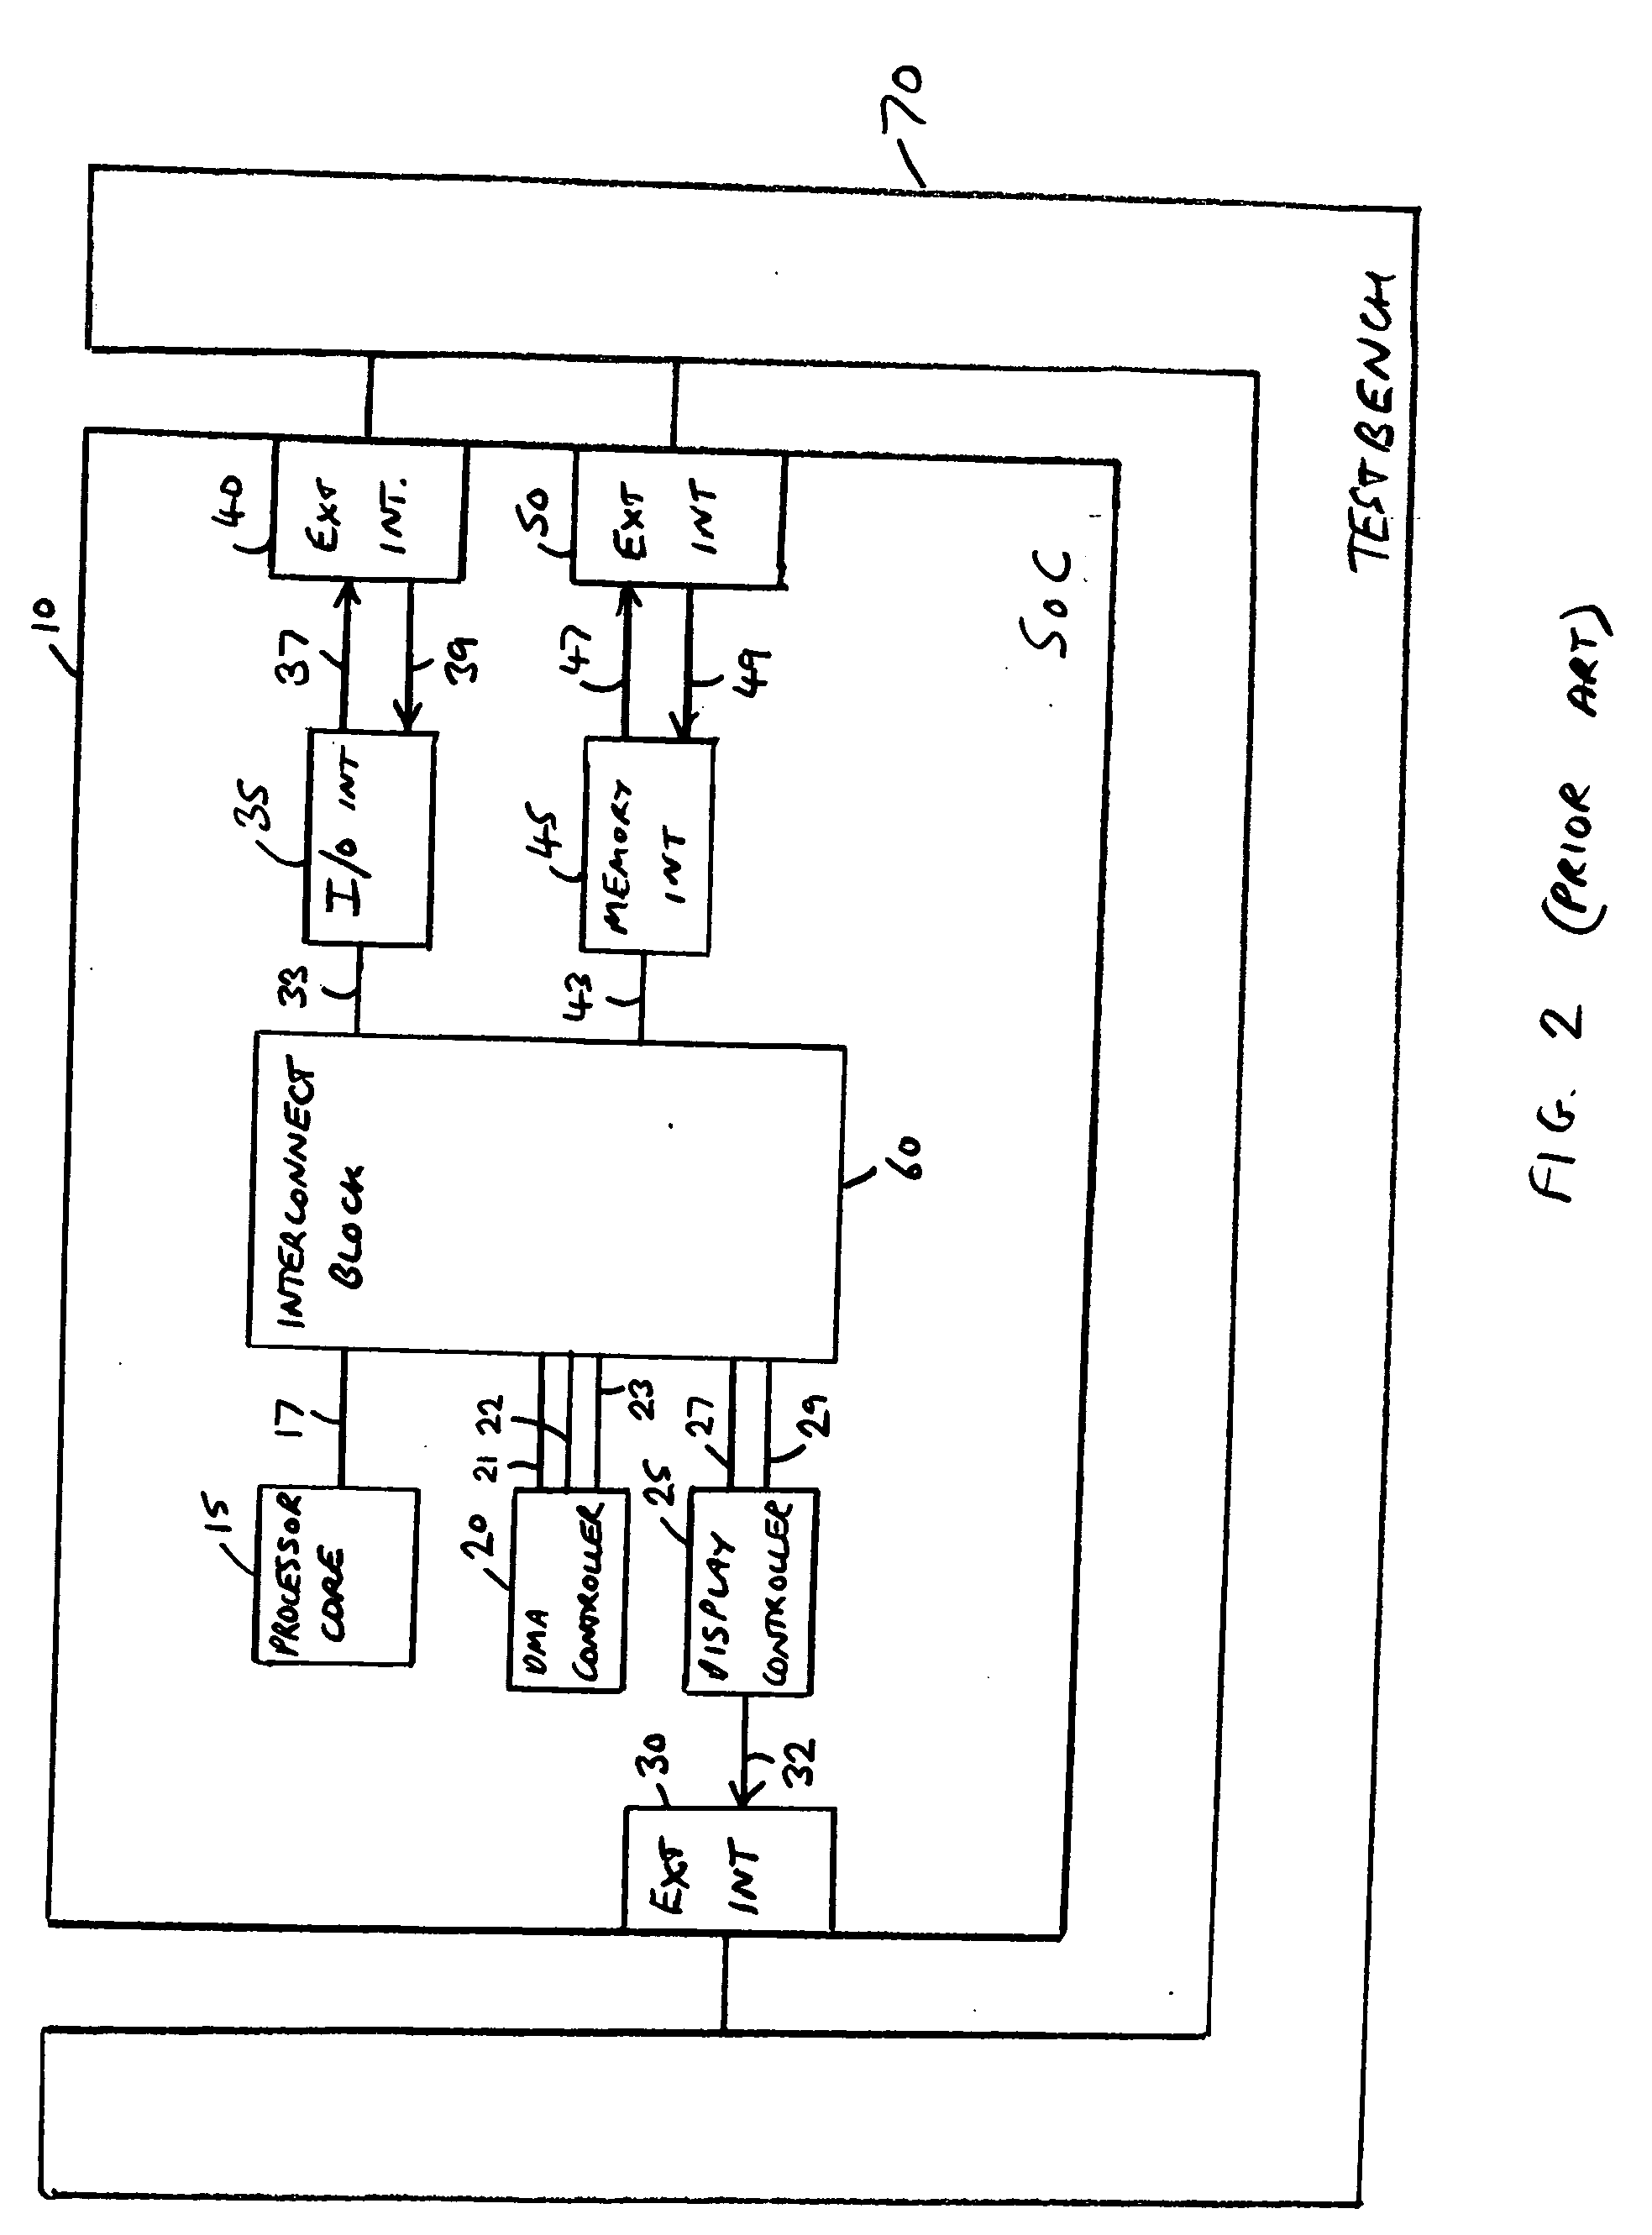 Generation of a testbench for a representation of a device